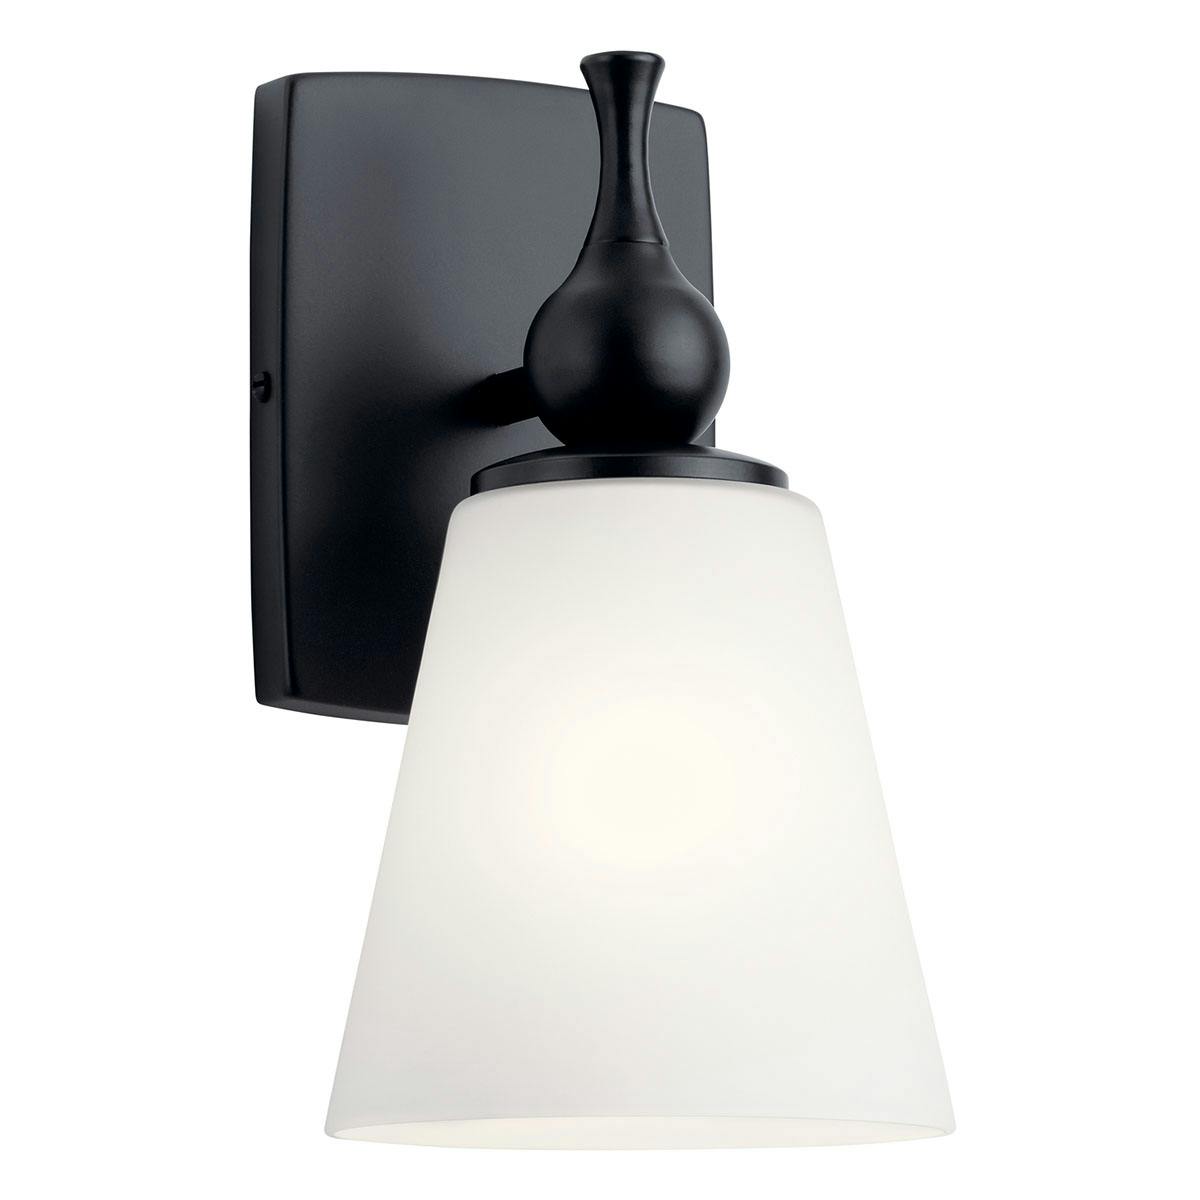 Cosabella 6" Sconce in a Black finish on a white background